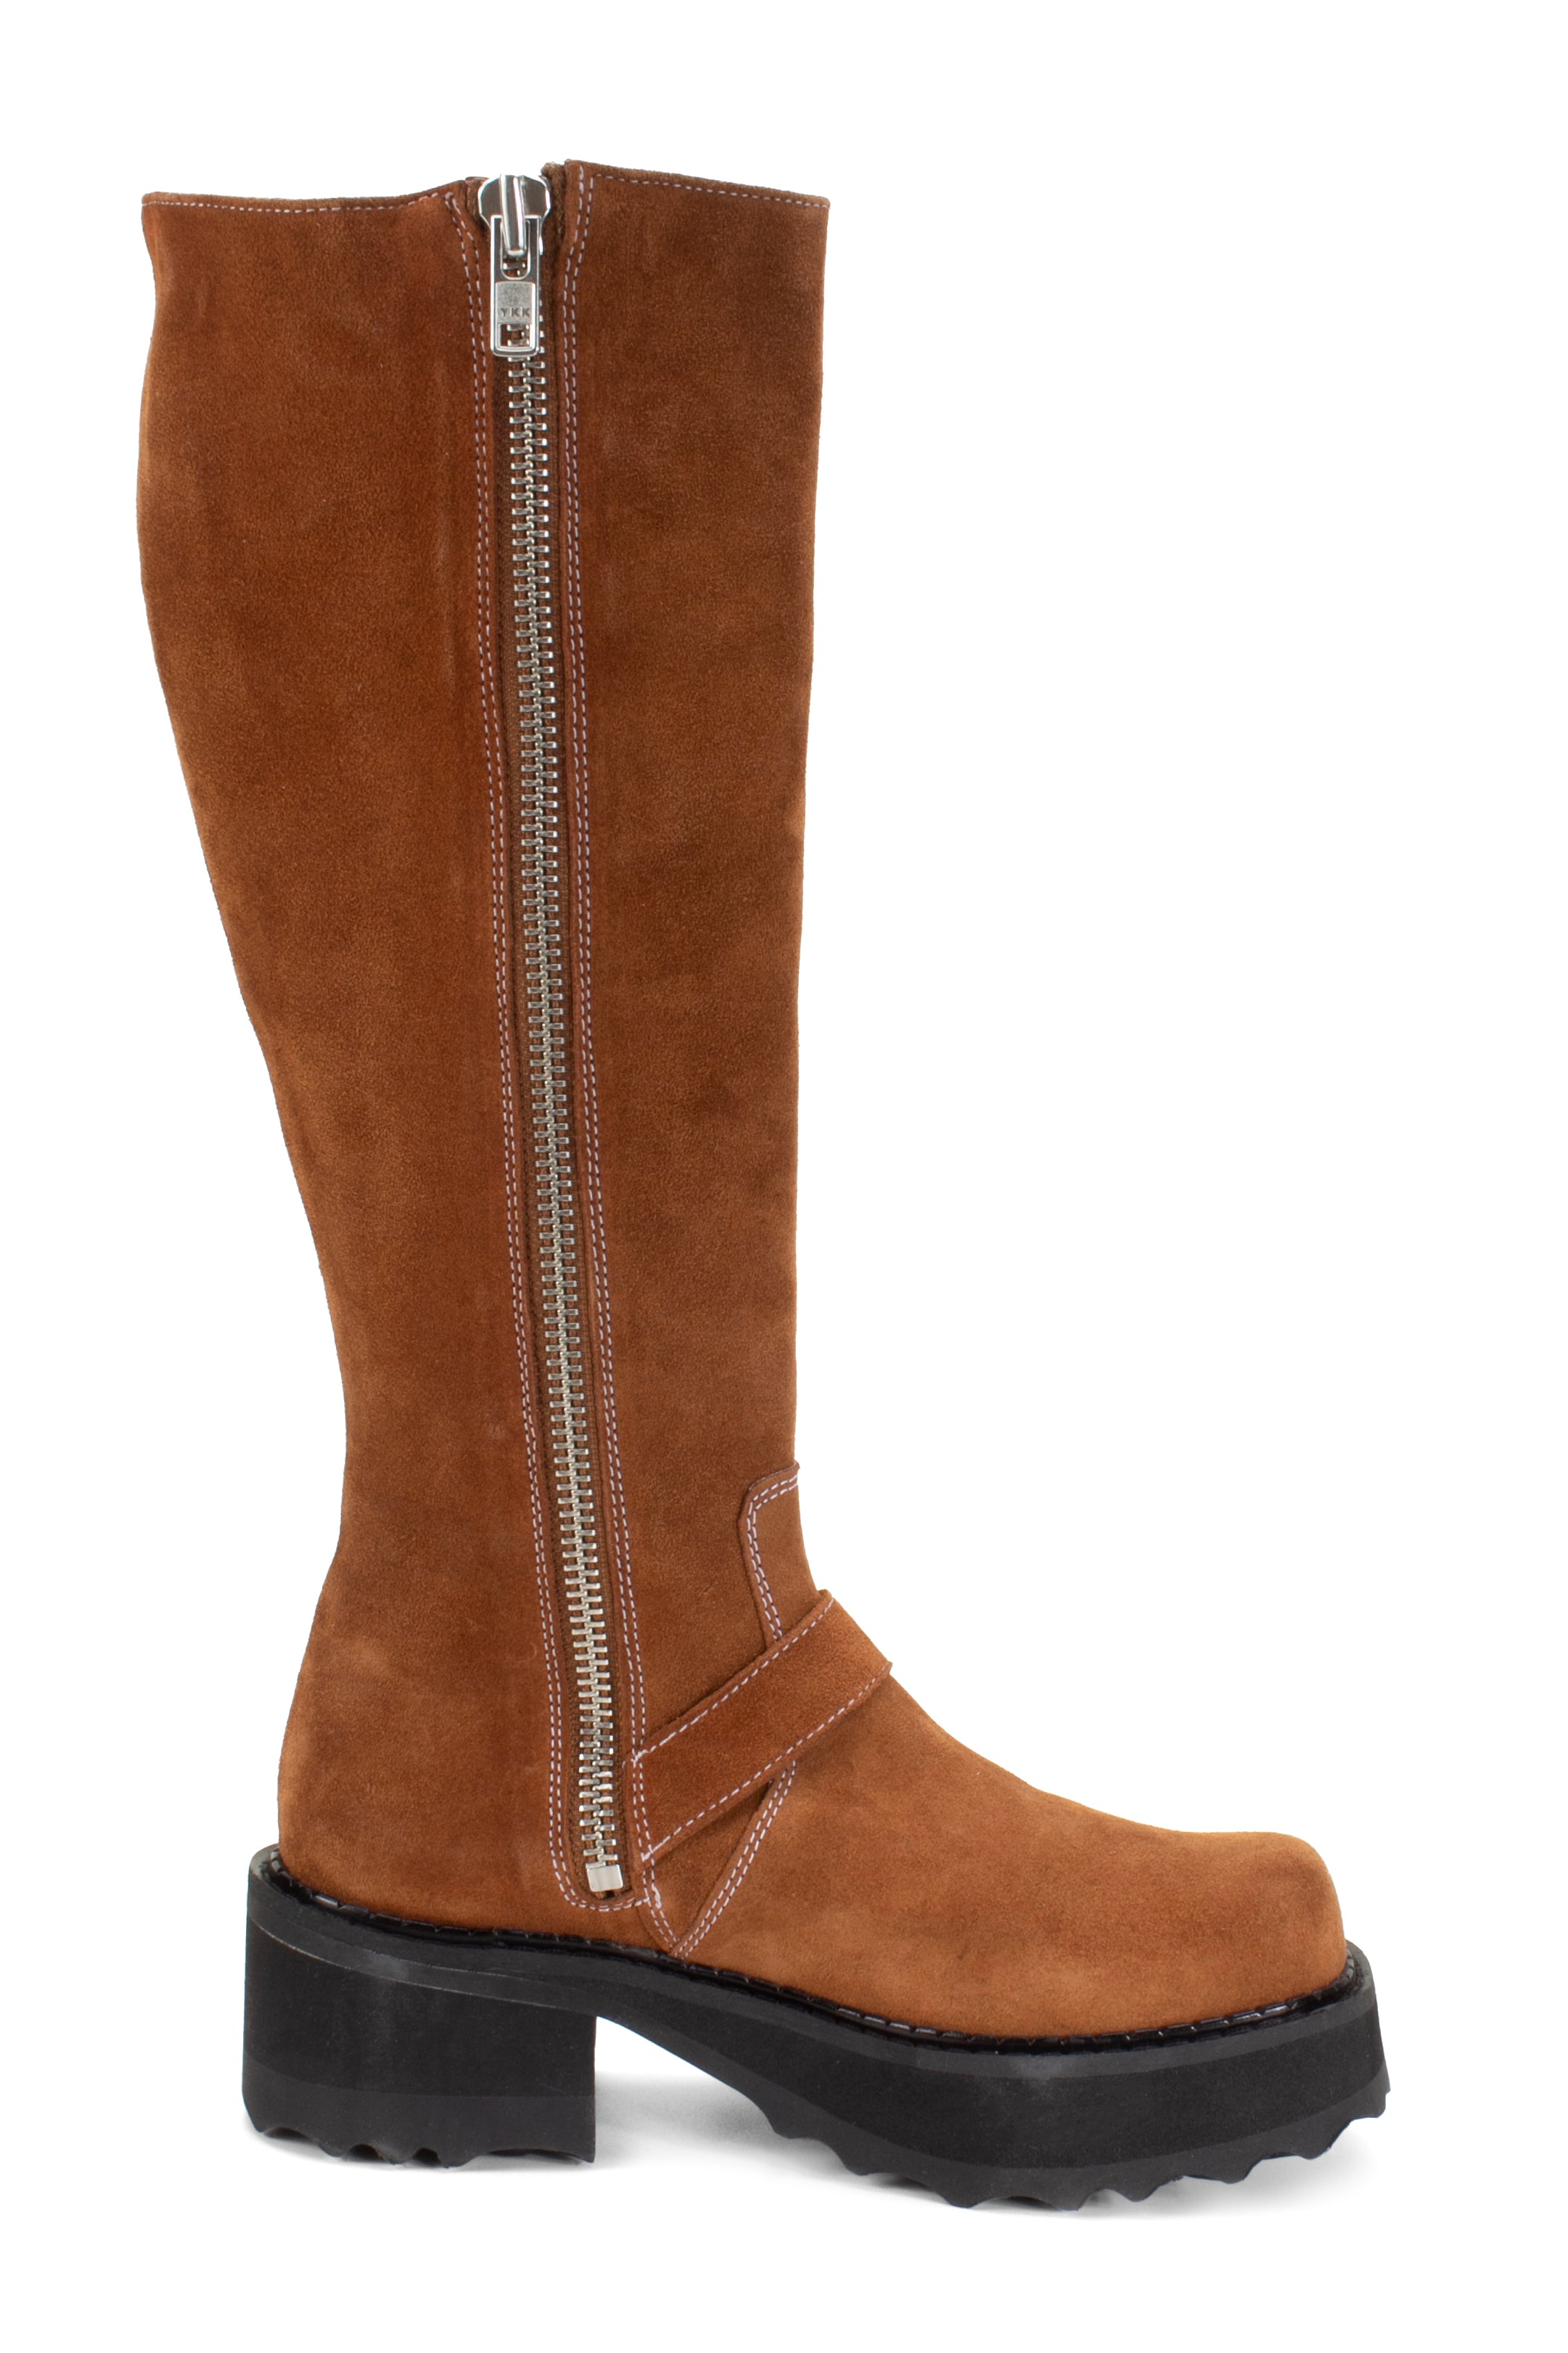 A large zipper inside the boots from top to botom, white stitches start from the top and go all the way down to the sole